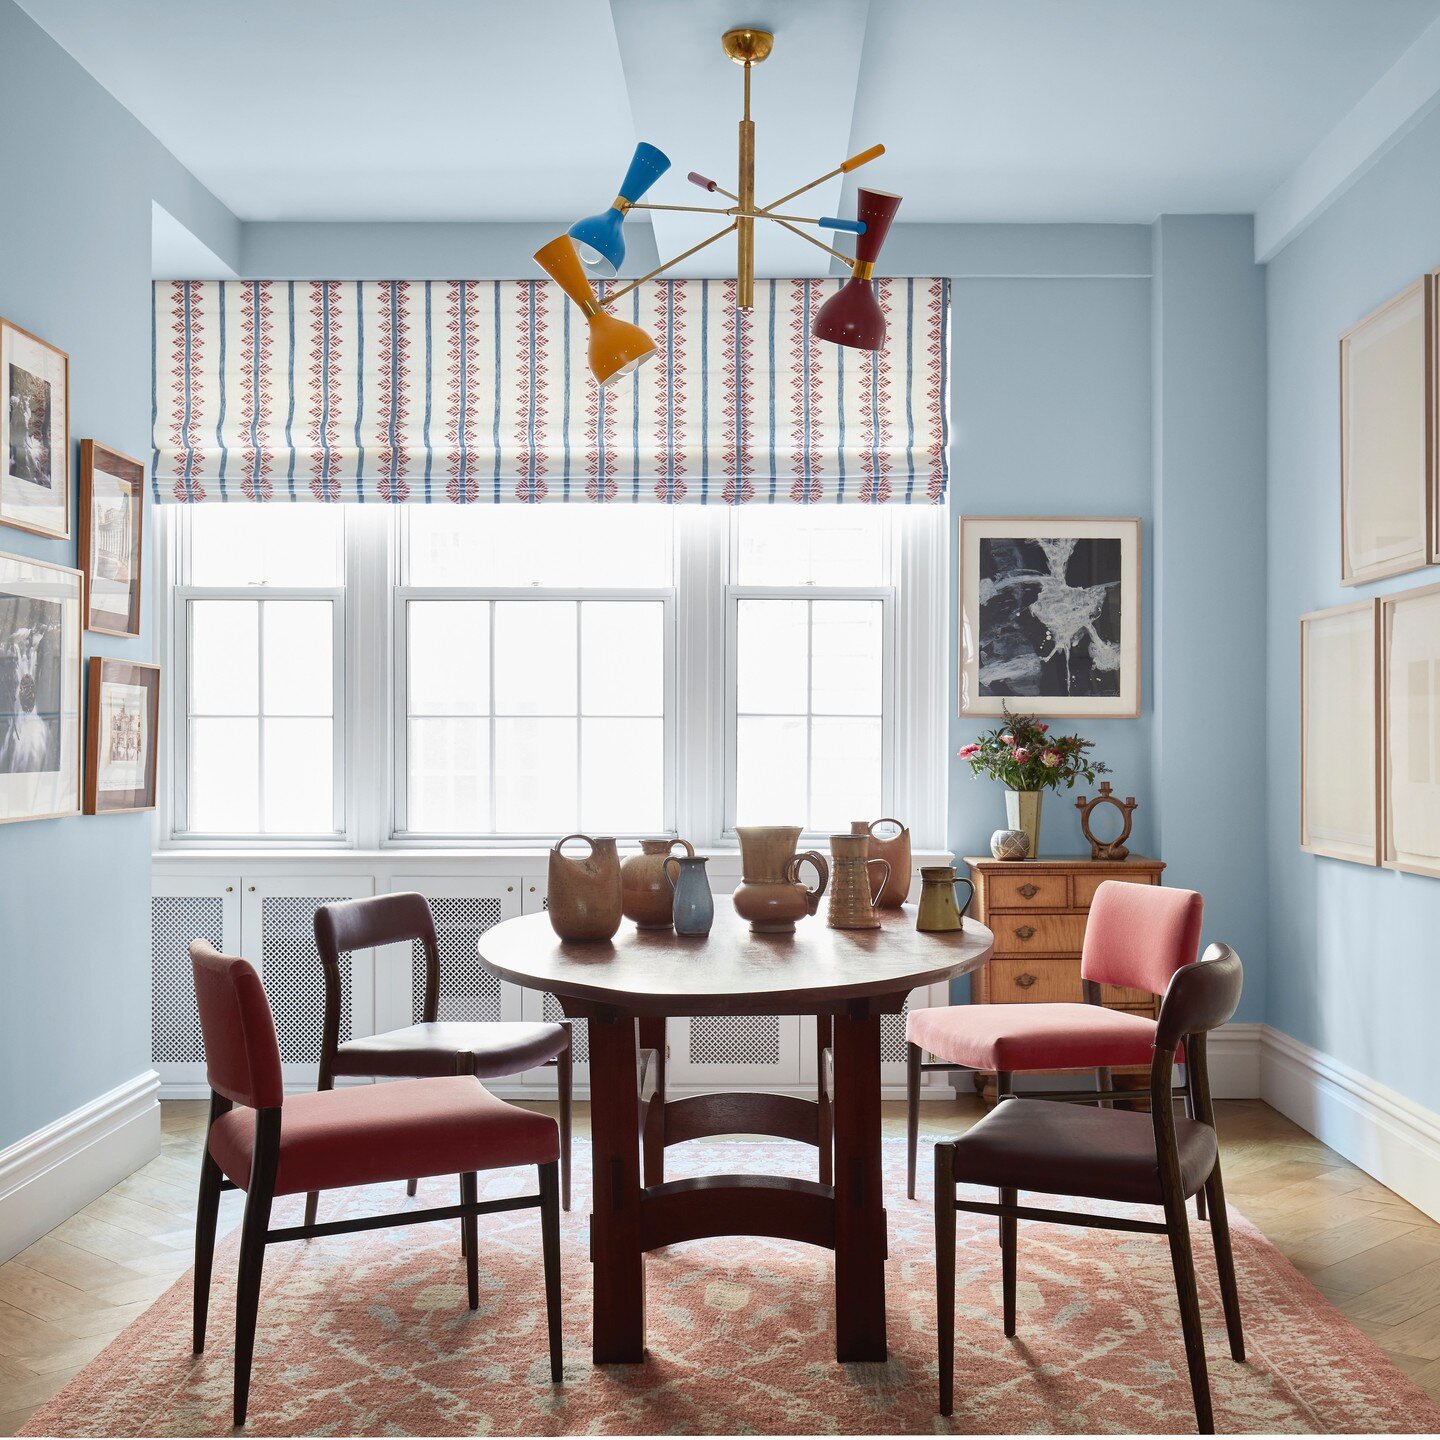 There is so much to love in the dining room from a recent UES project: a contrappeso chandelier from Artemest, dining chairs from Julian Chichester, Anna French fabric on the window treatments, and a custom rug from Beauvais. The client's own artwork